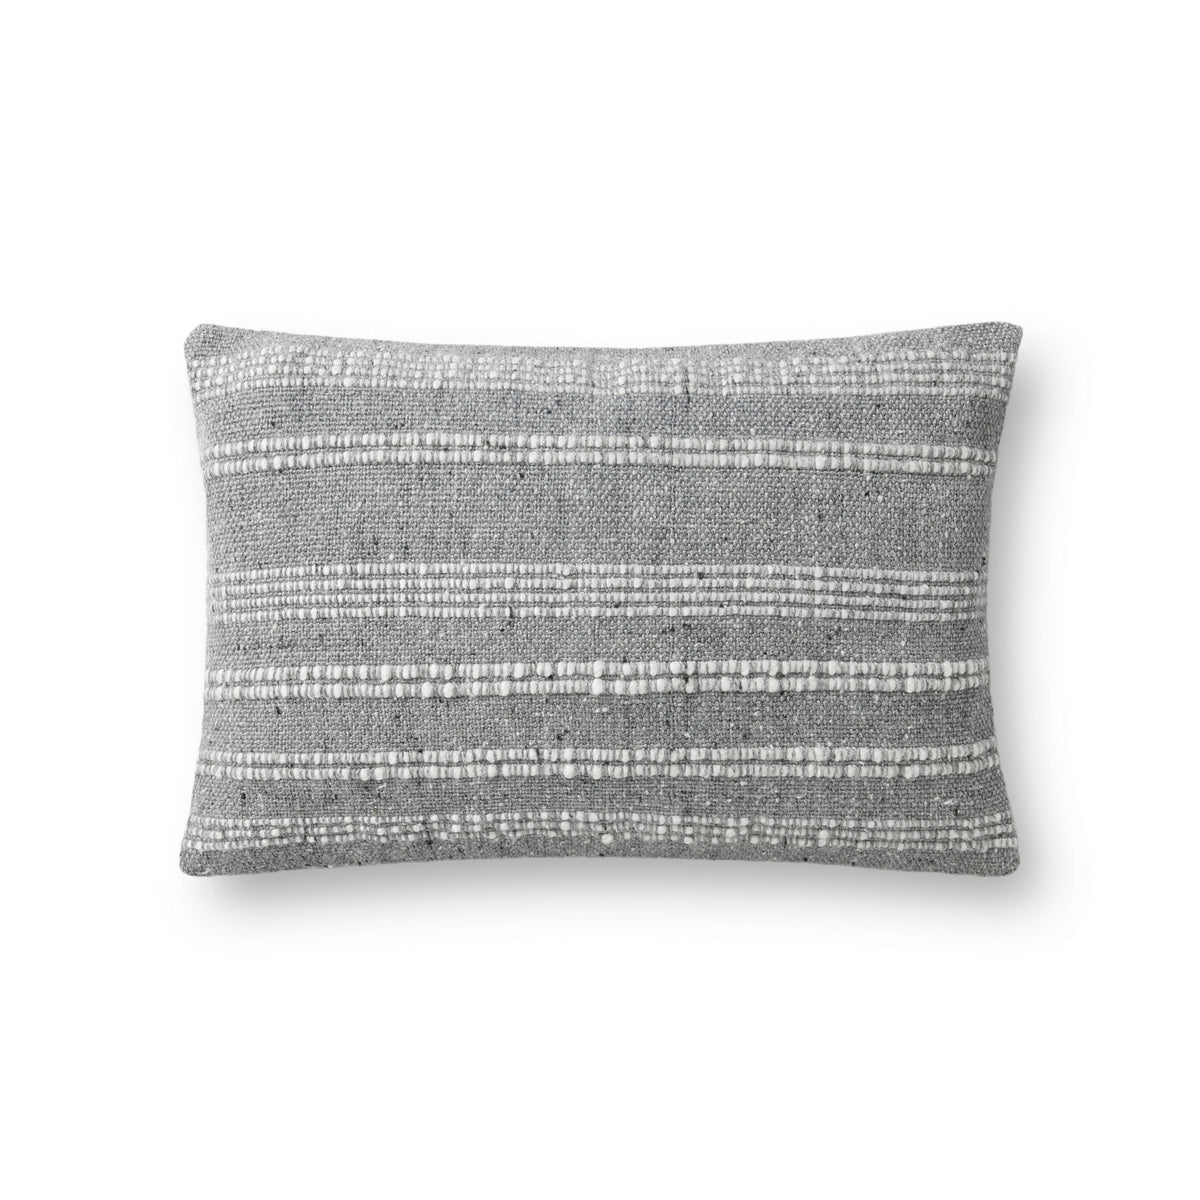 Deeply Woven Gray Pillow Cover